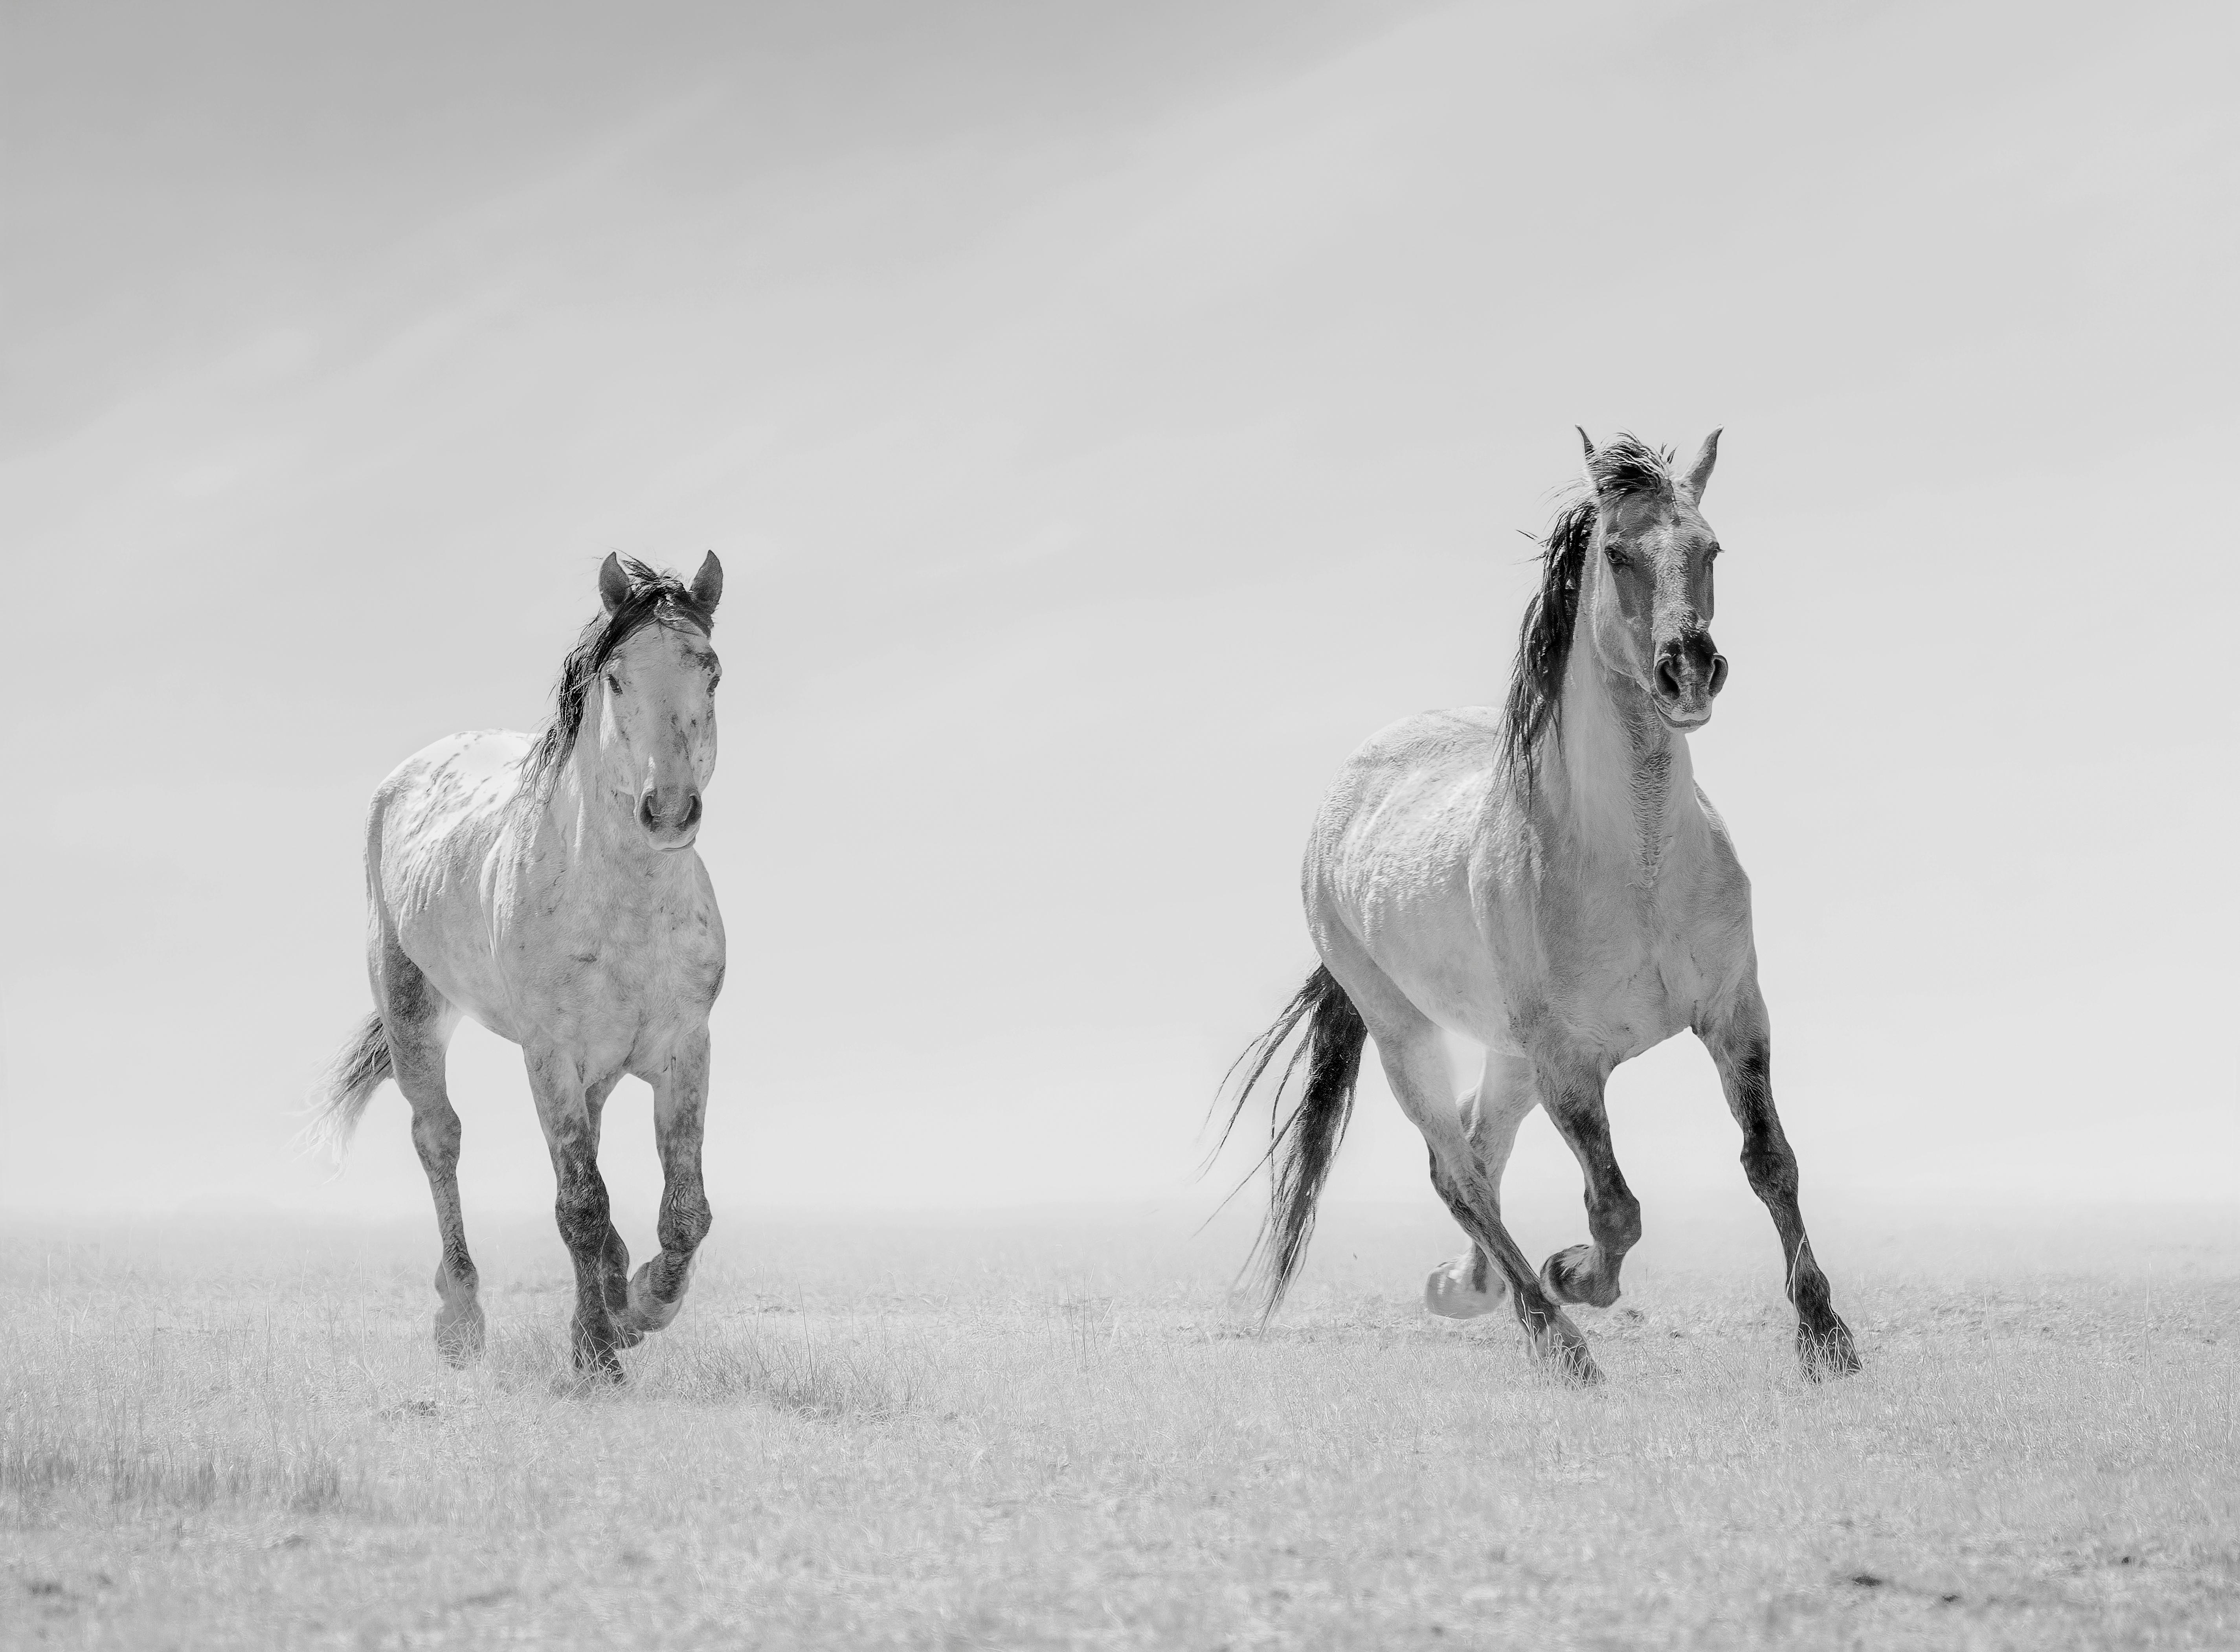 Shane Russeck Black and White Photograph - "Heroes of the West " 36x48 - Black & White Photography, Wild Horses, Mustangs